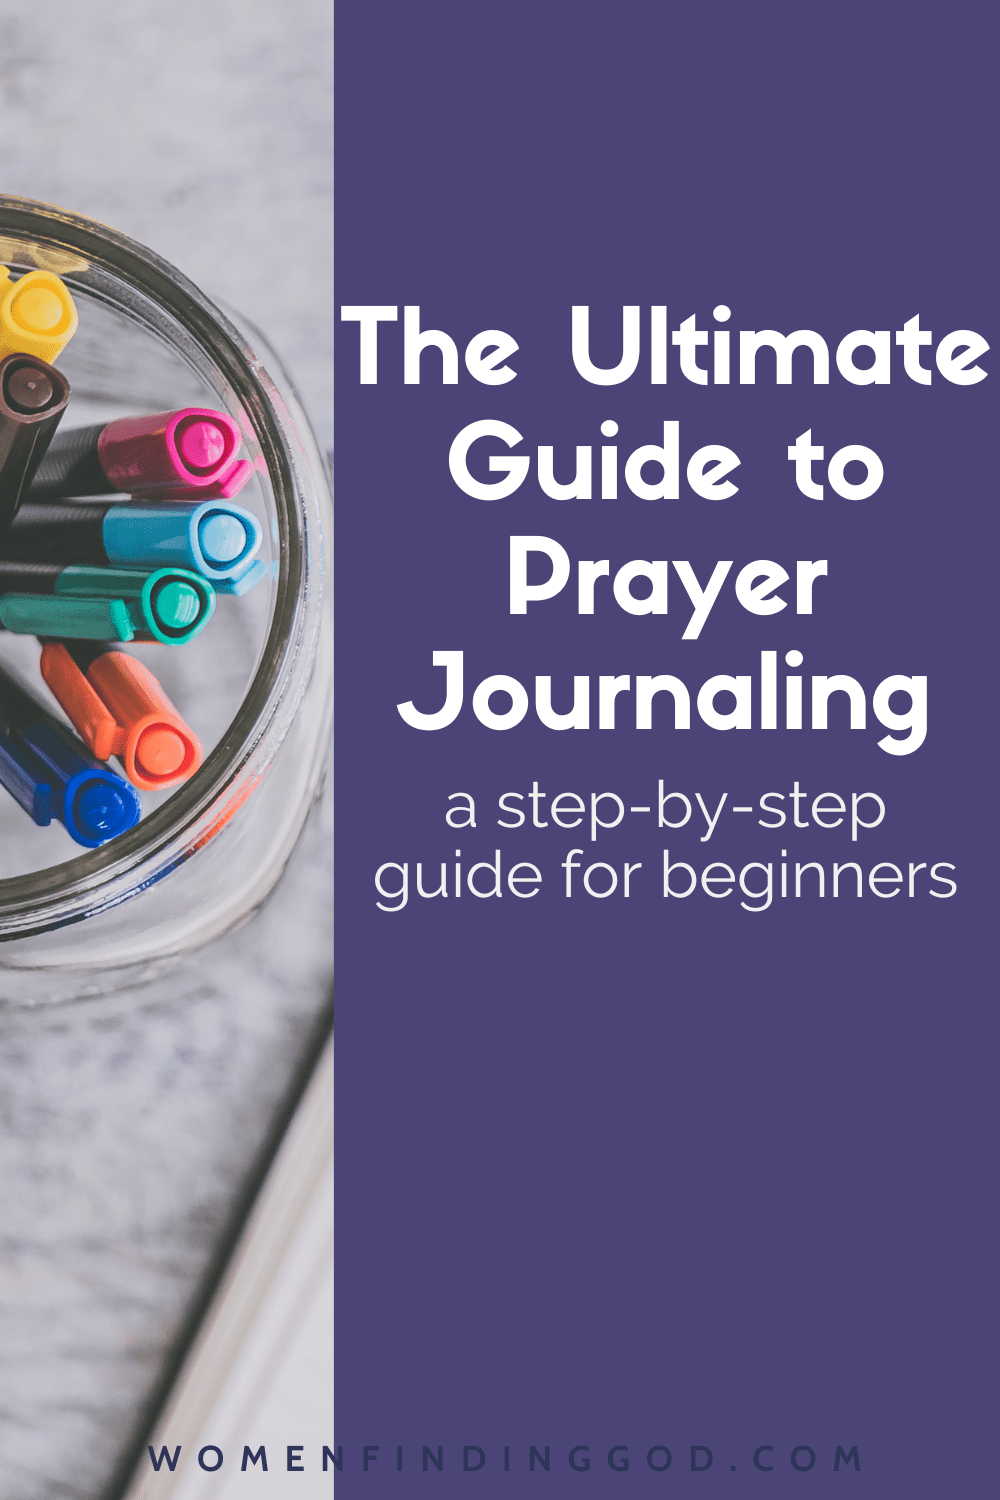 Are you ready to learn how to make a prayer journal? Learn the three reasons to start a prayer journal and three benefits to writing down your prayers - without having to deal with overwhelm. Plus, tips about what to put in your prayer journal and how to make your own prayer journal or prayer binder. via @womenfindinggod